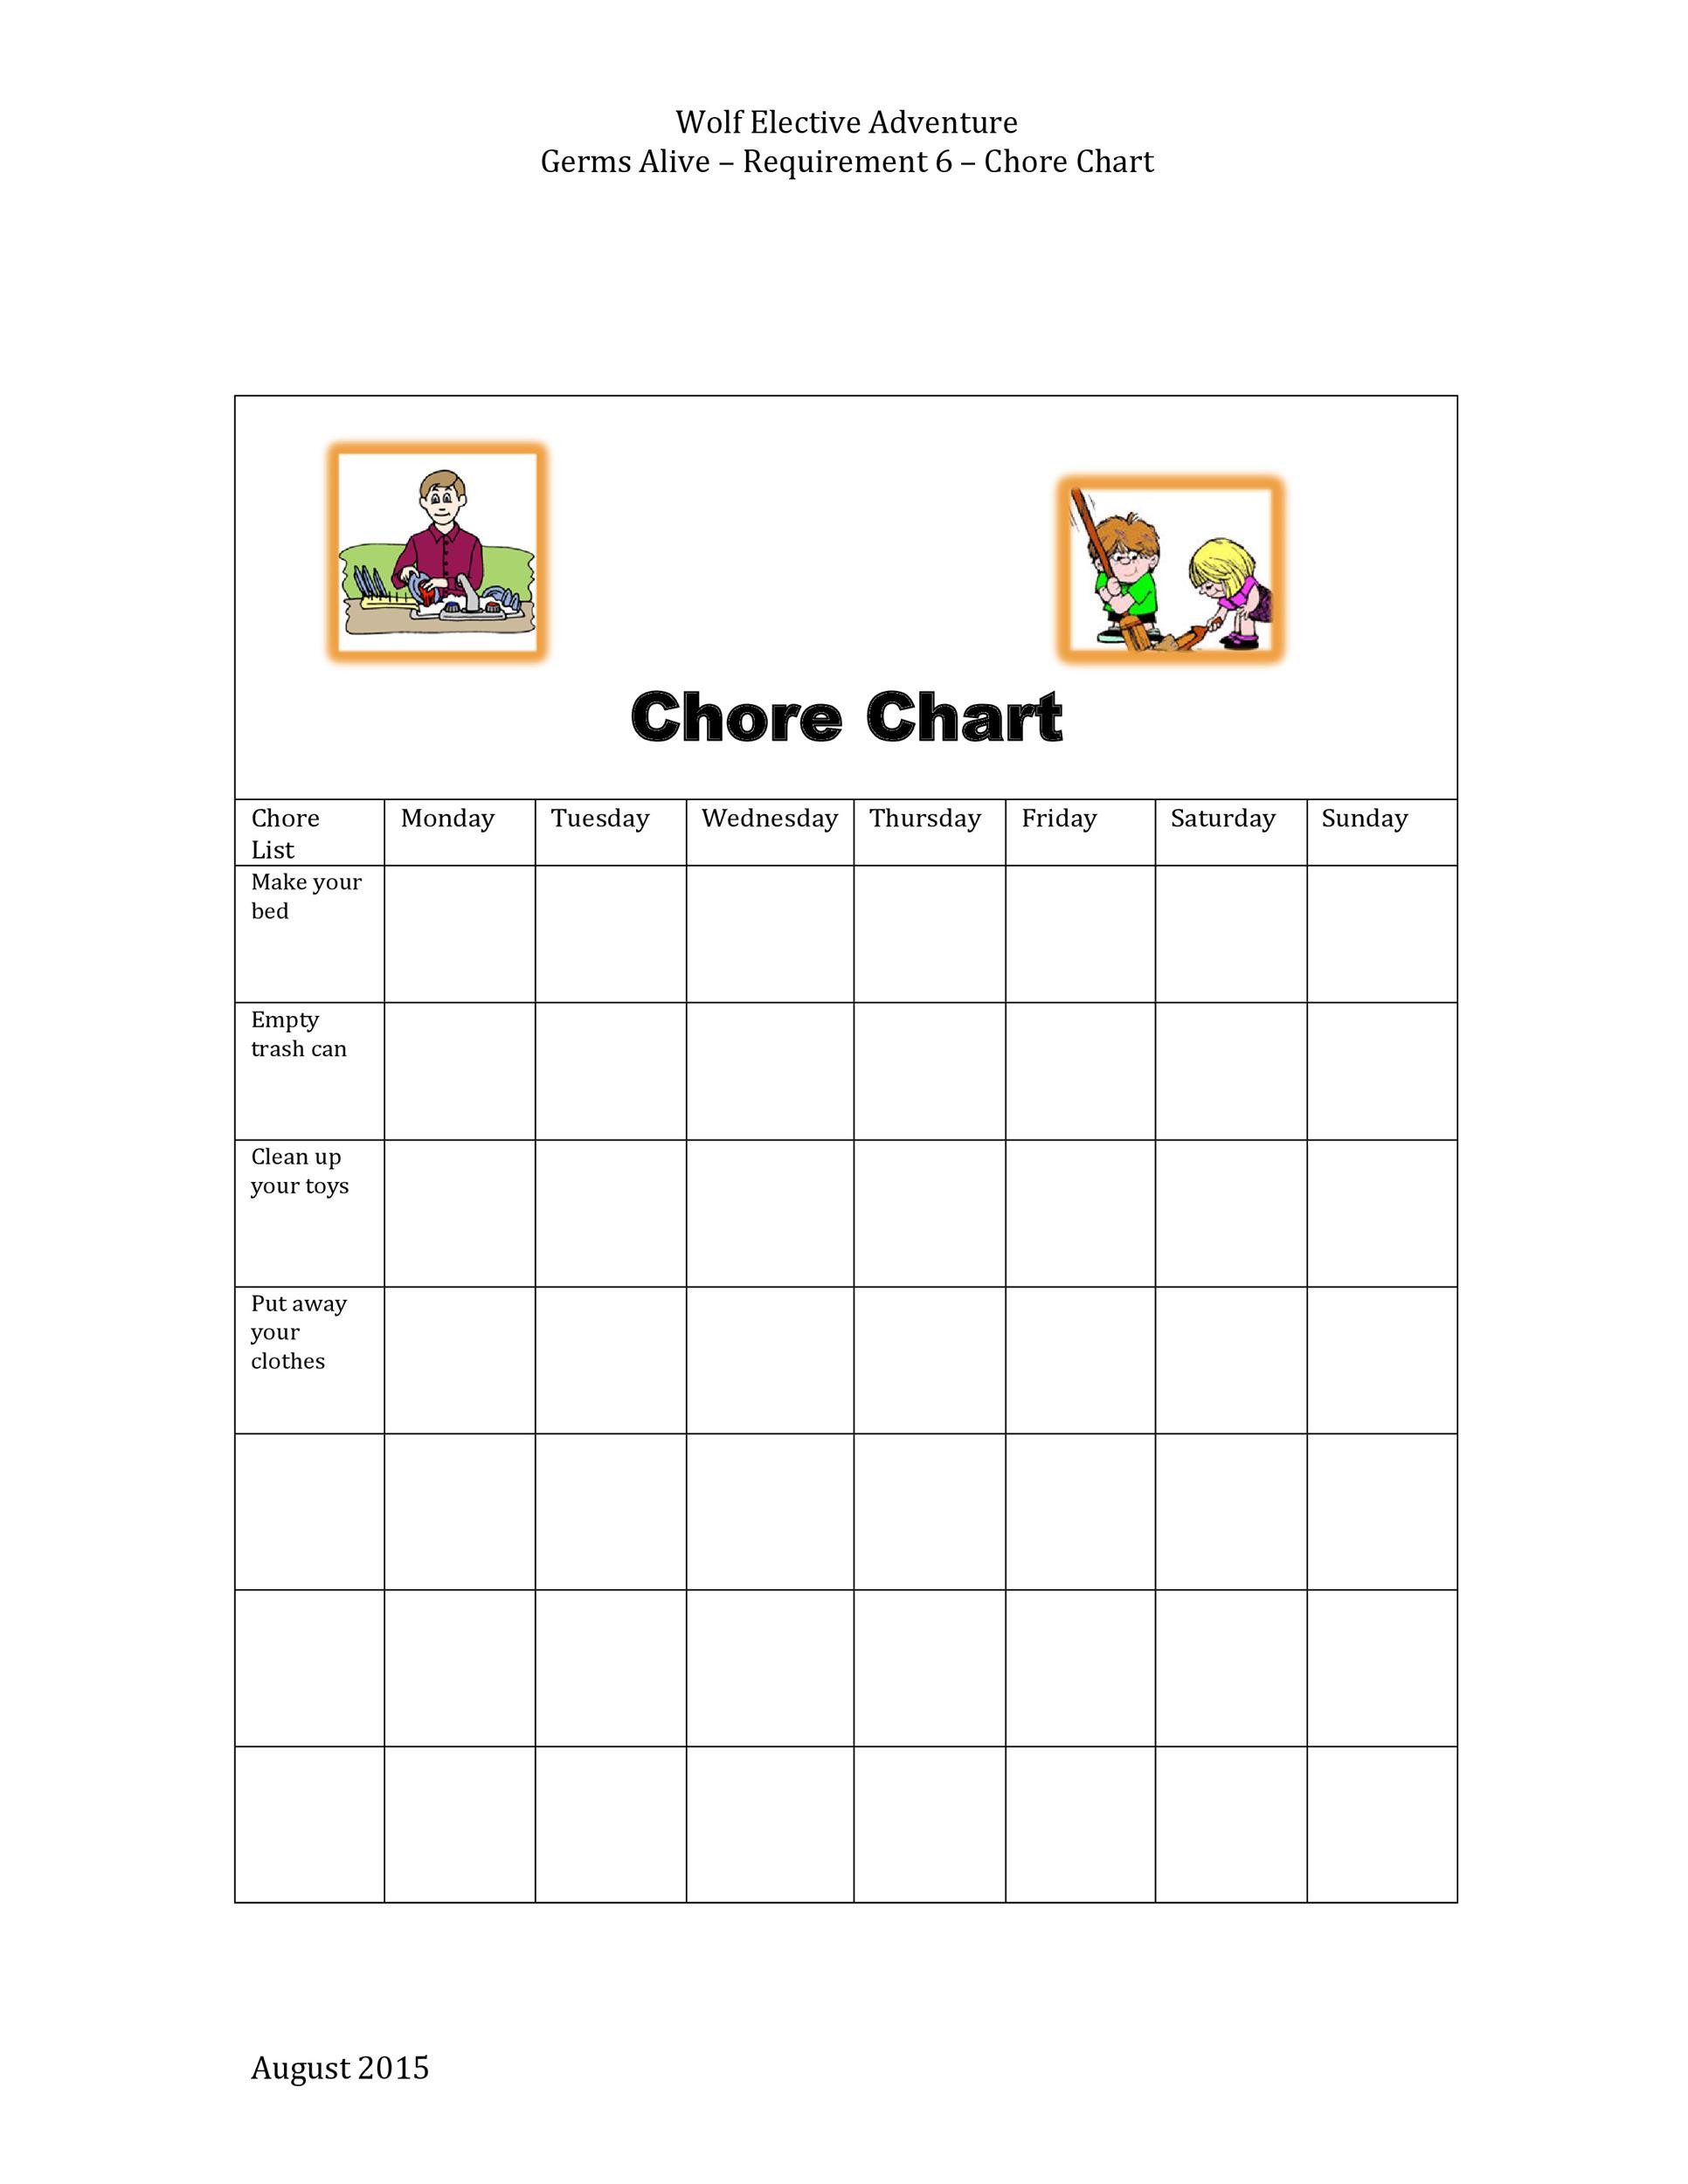 Printable Chore Chart For 6 Year Old